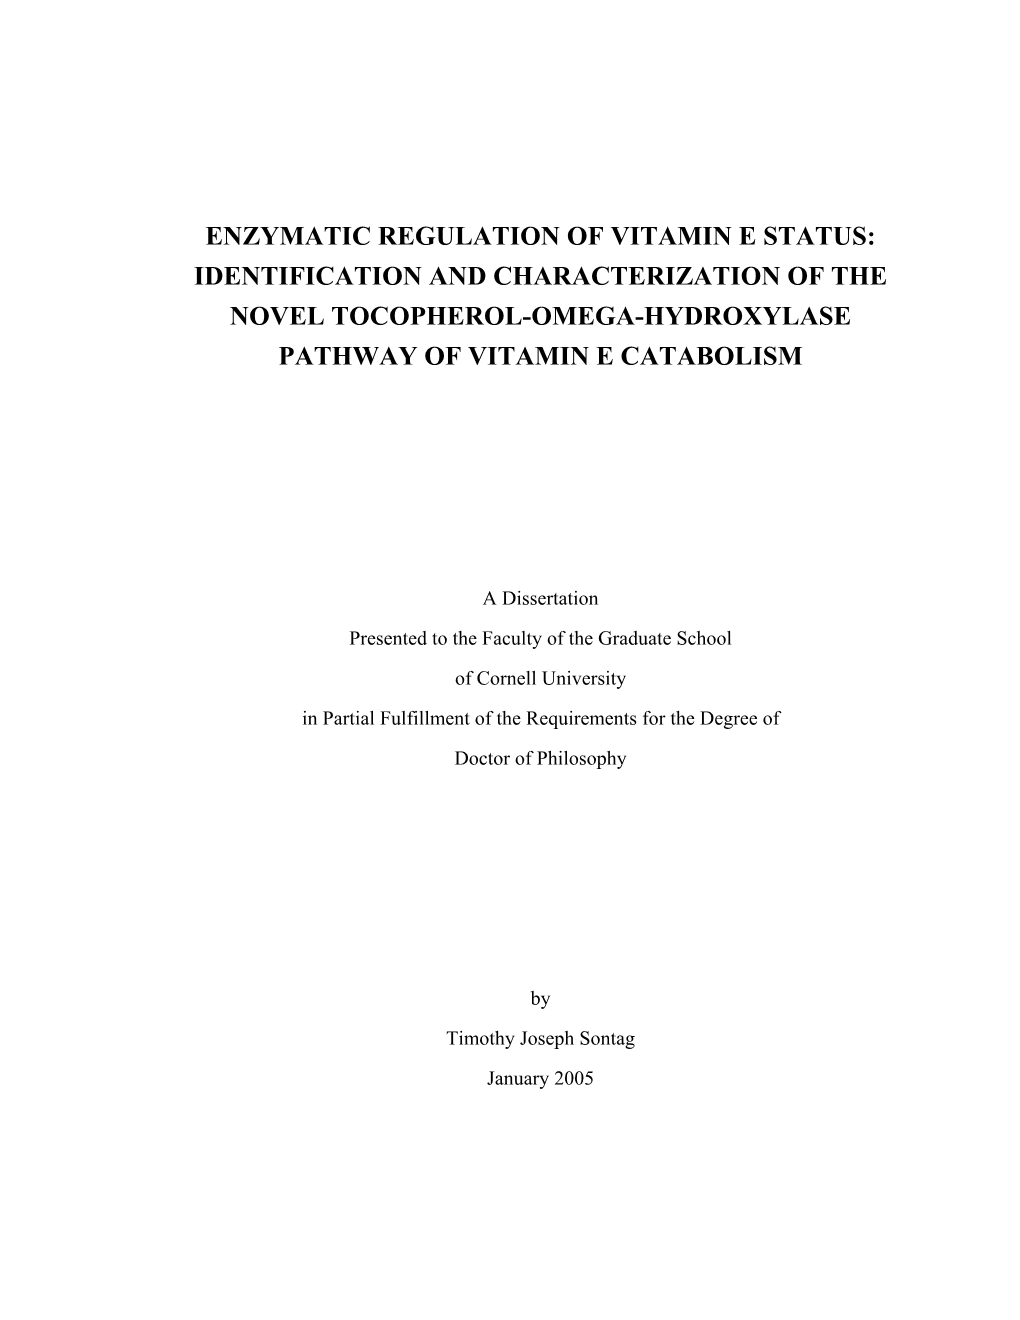 Enzymatic Regulation of Vitamin E Status: Identification and Characterization of the Novel Tocopherol-Omega-Hydroxylase Pathway of Vitamin E Catabolism